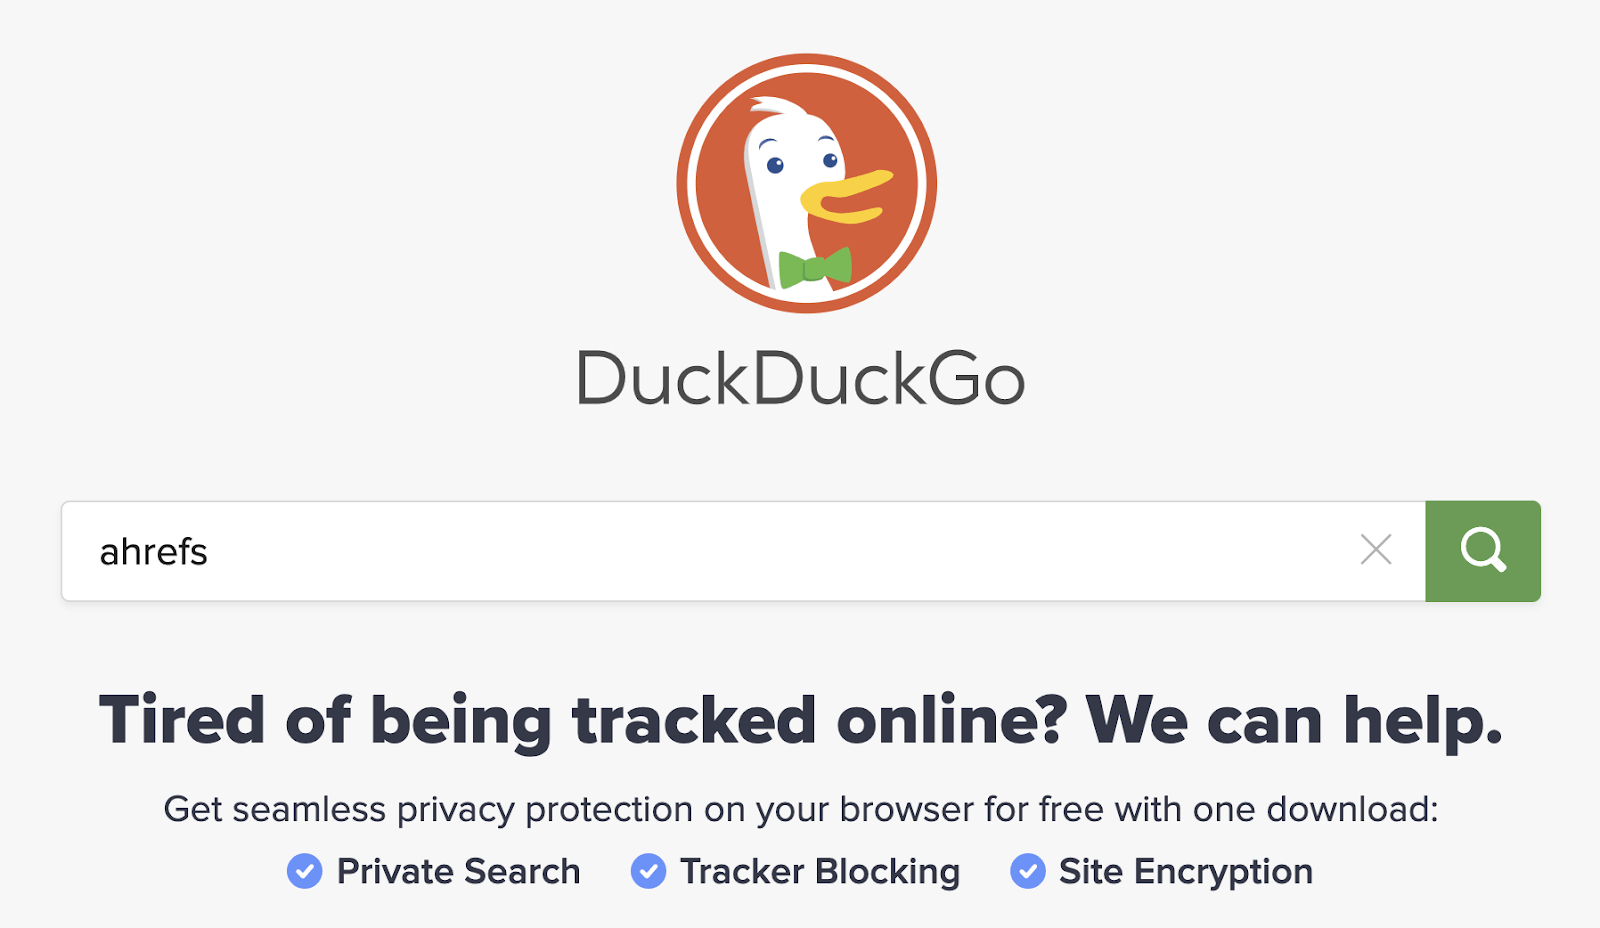 DuckDuckGo's homepage. Search term "ahrefs" in text field